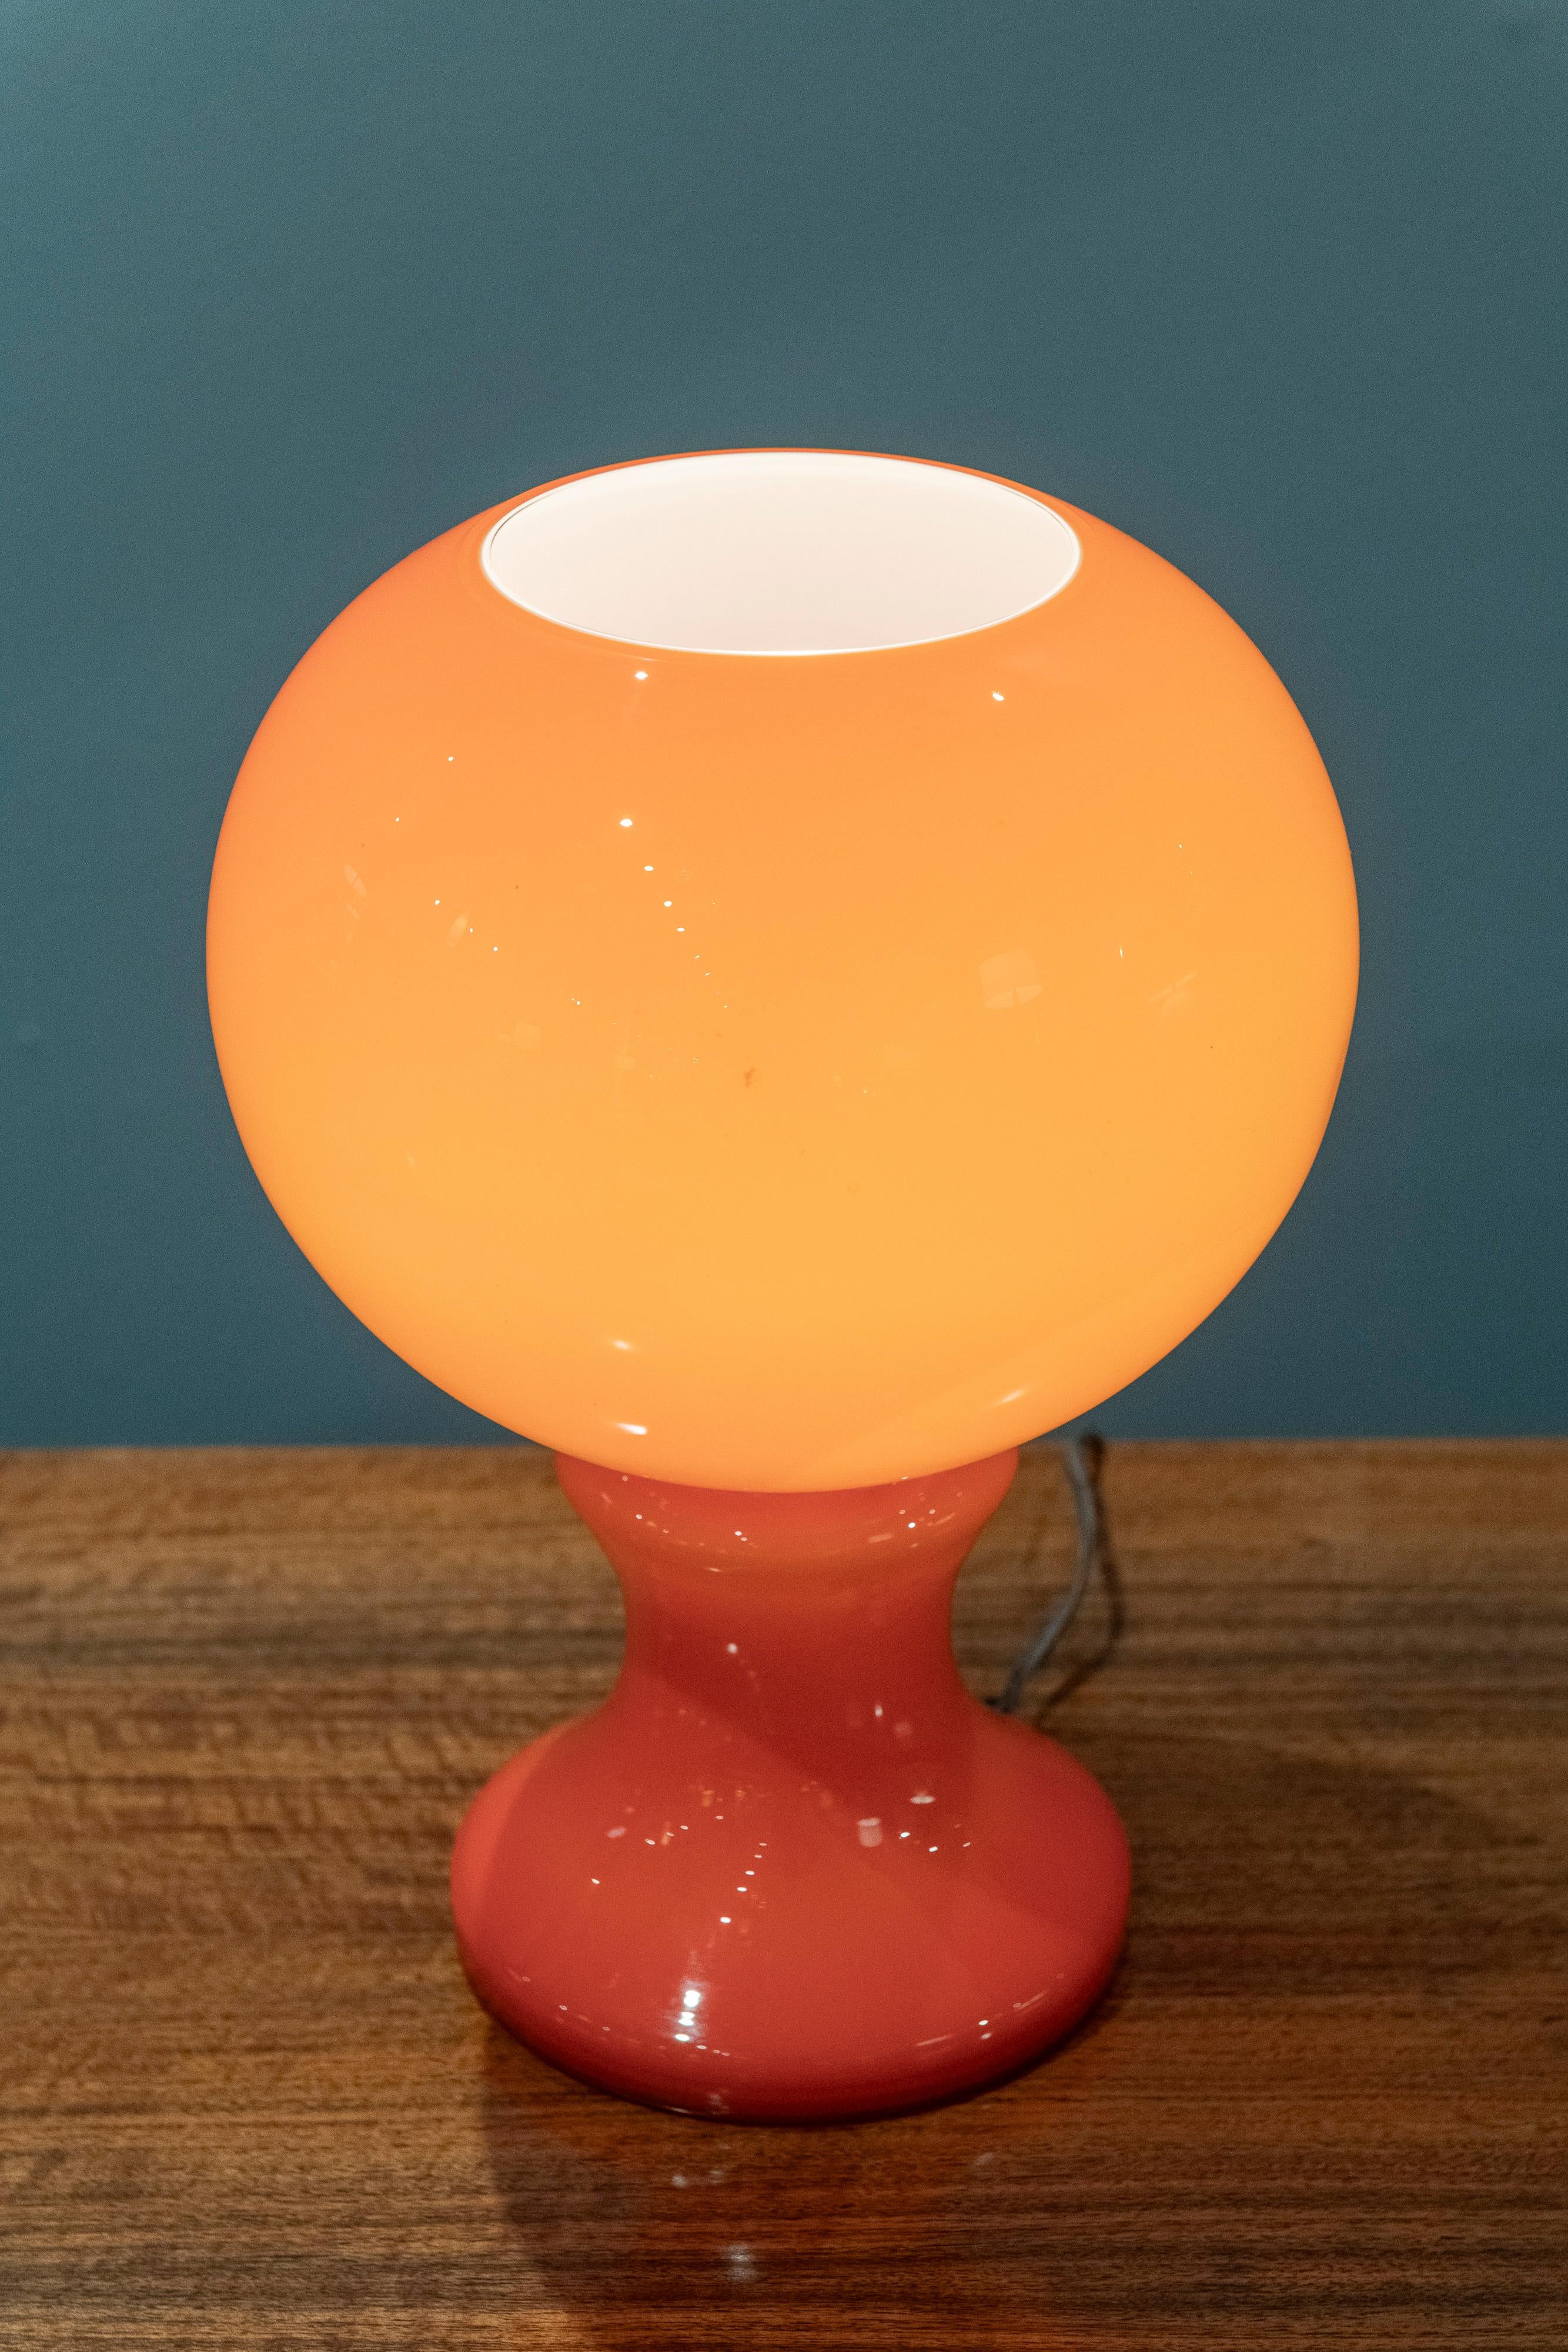 Ingo Maurer design blown glass table lamp, Germany. Model ML32 eye catching form and color seldom seen. In very good original condition and works as it should.